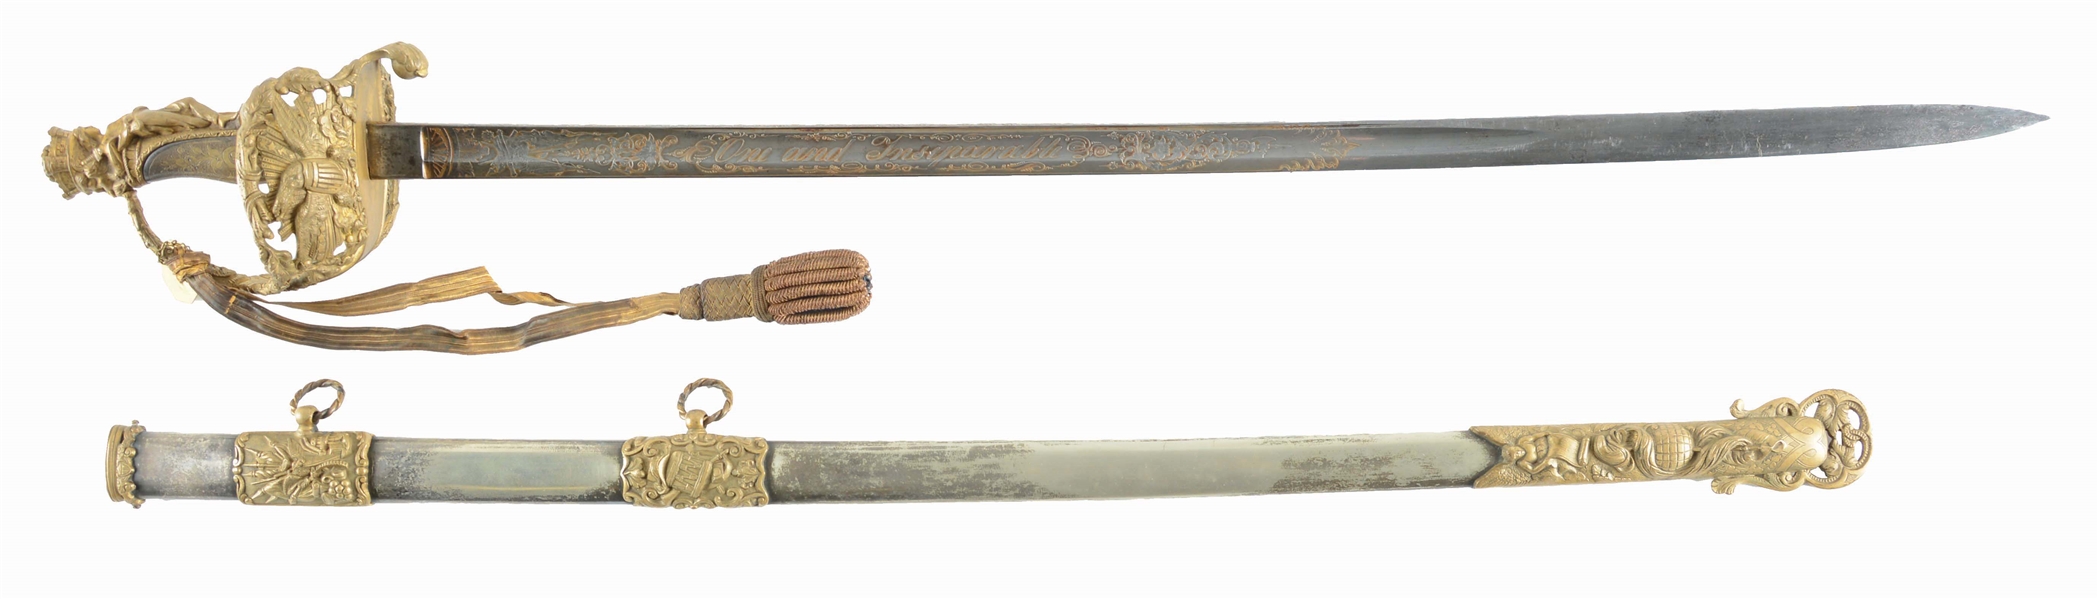 A VERY FINE AND ELABORATE LIBERTY HILT CIVIL WAR PRESENTATION SWORD GIVEN TO LIEUTENANT COLONEL AND ACTING INSPECTOR-GENERAL W.D. SMITH, SCABBARD MOUNT ENGRAVED STAPLETON AND CO., WITH SILVER GRIP.